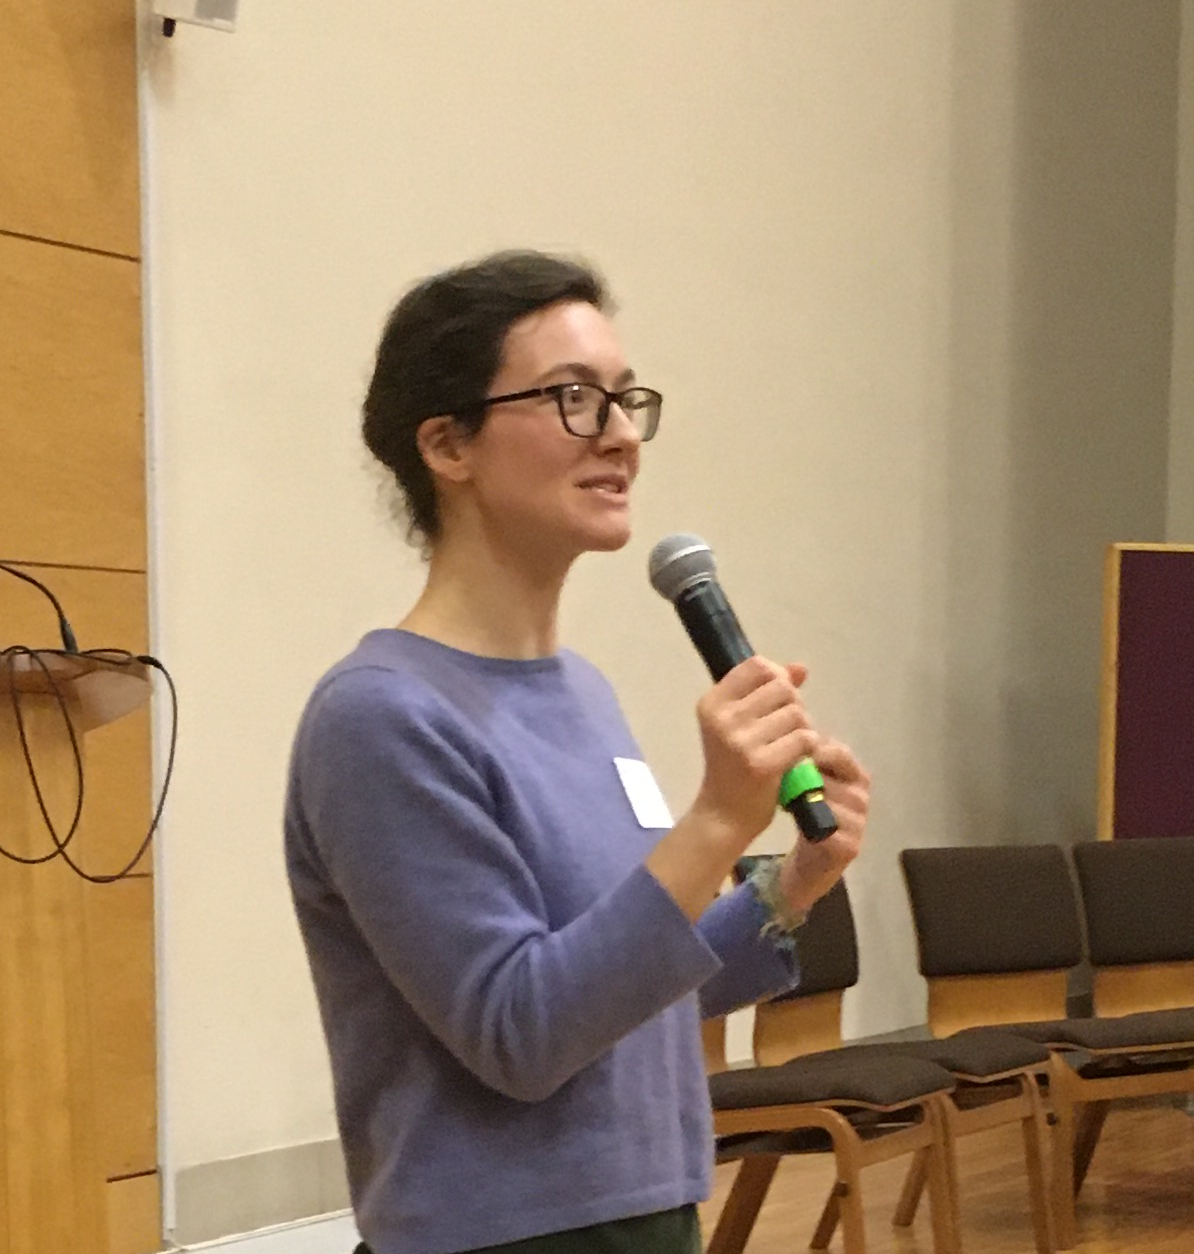 Rebecca speaking at an outreach event